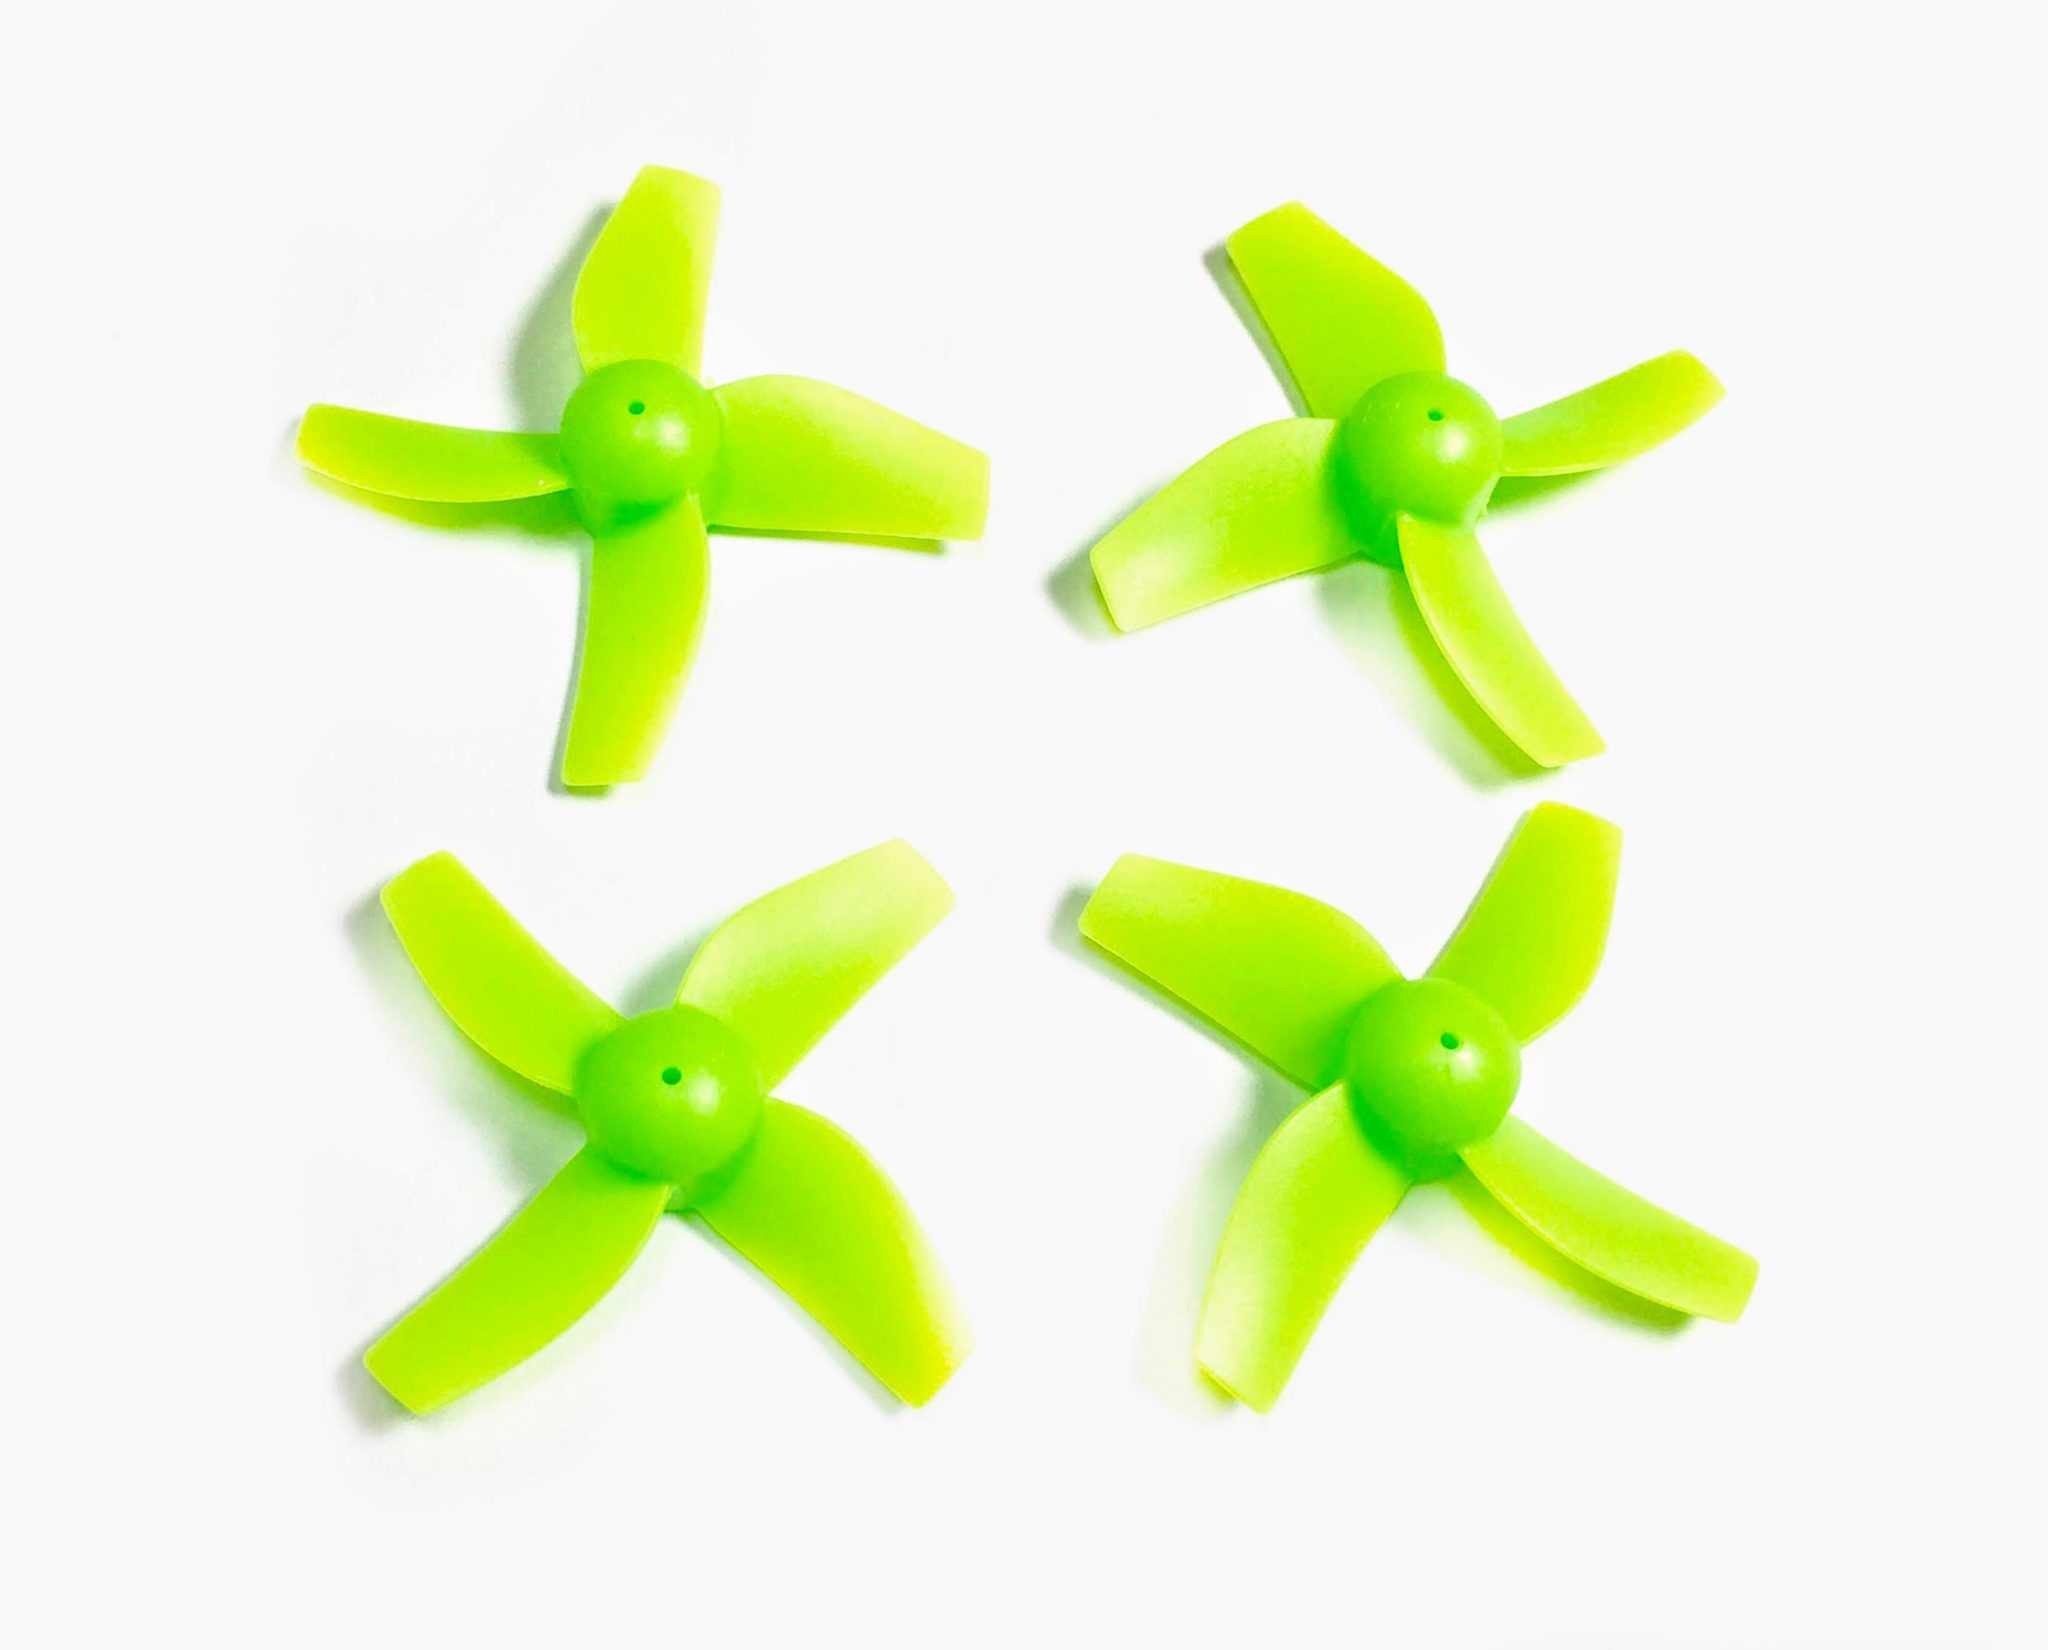 10 pairs Eachine 31mm 4 Blades Propeller (2CW, 2CCW) Green